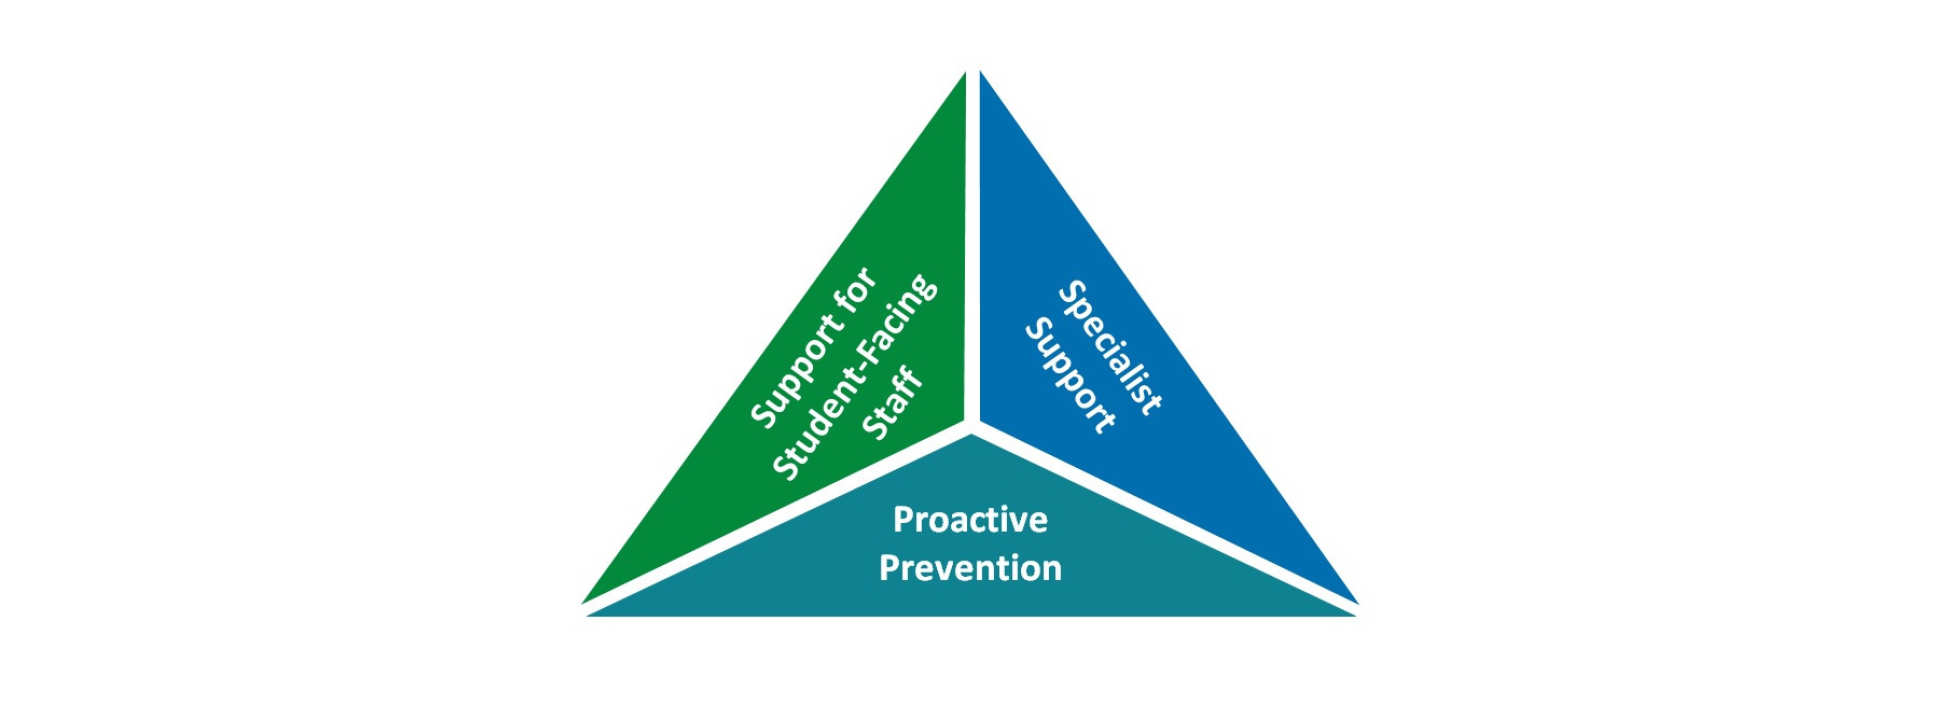 Wellbeing Pyramid - Support for student-facing staff, specialist support, and proactive prevention.